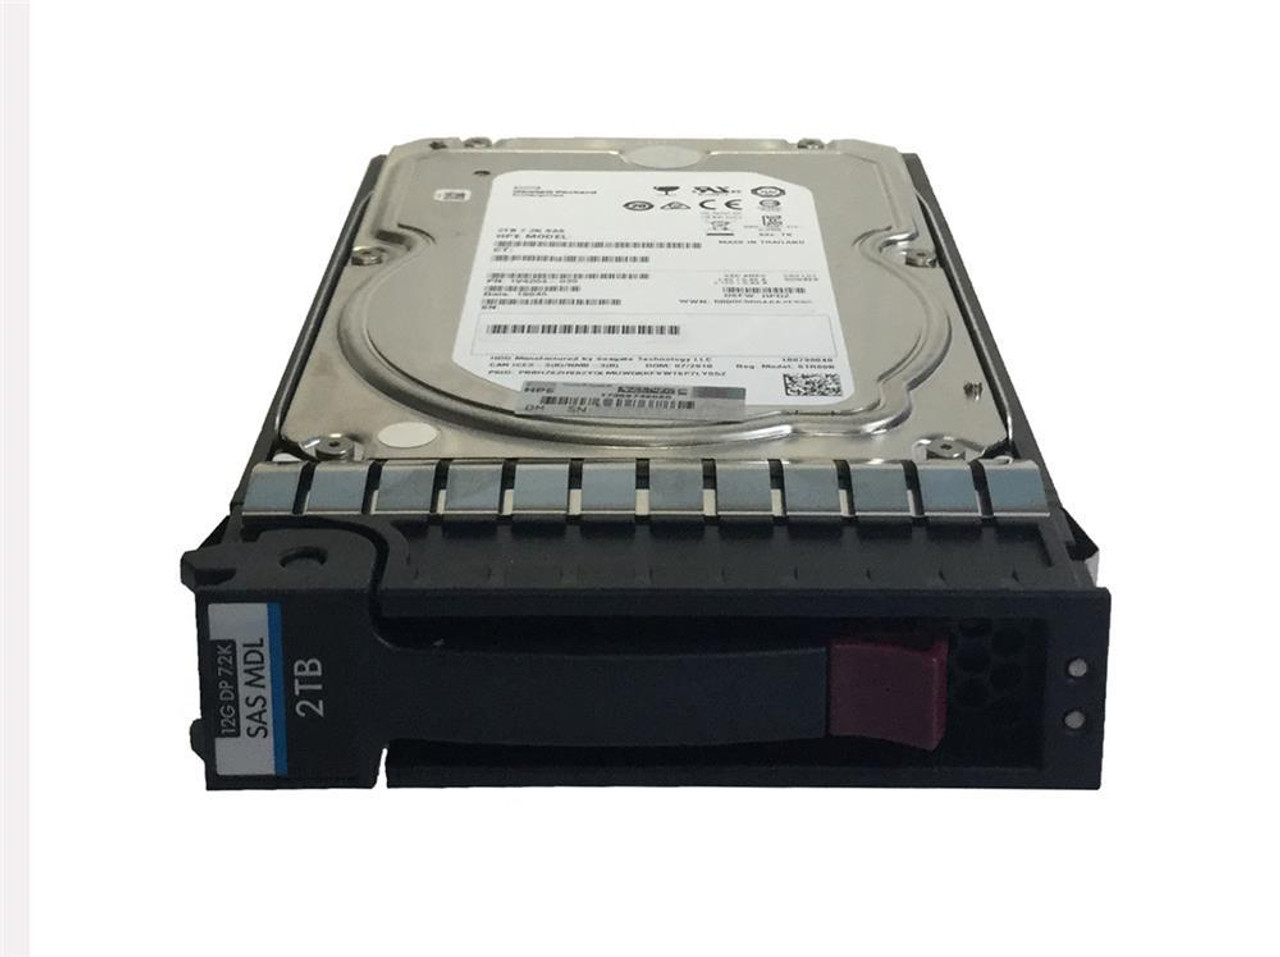 872289-001 HPE 2TB 7200RPM SAS 12Gbps 3.5-inch Internal Hard Drive with Smart Carrier